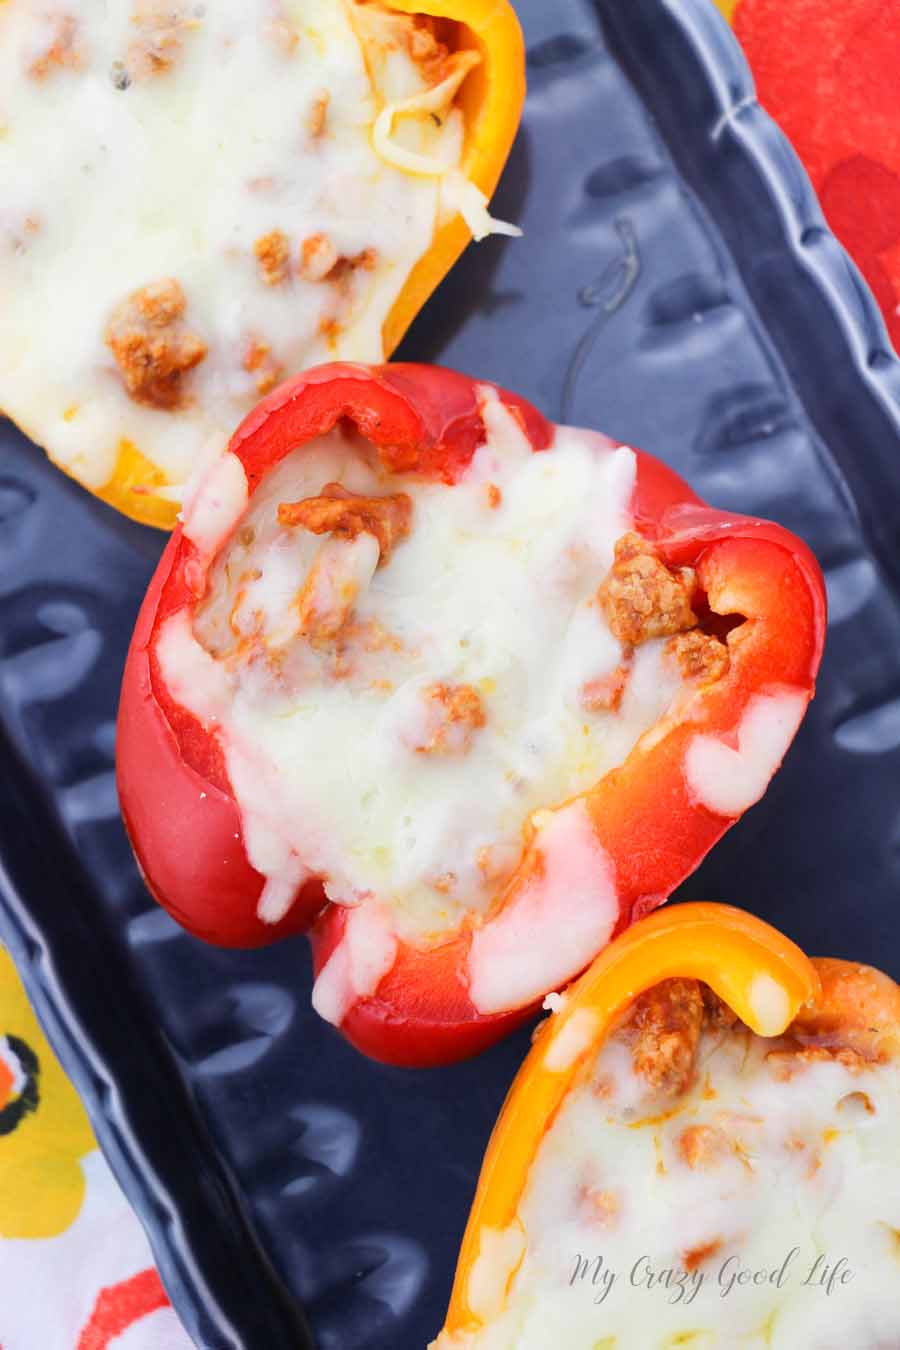 Slow cooker pizza stuffed peppers are a tasty twist on this classic dish. You can make this delicious recipe for lunch, dinner, or as a quick and easy meal prep for the week ahead! #slowcooker #21dayfix #recipes